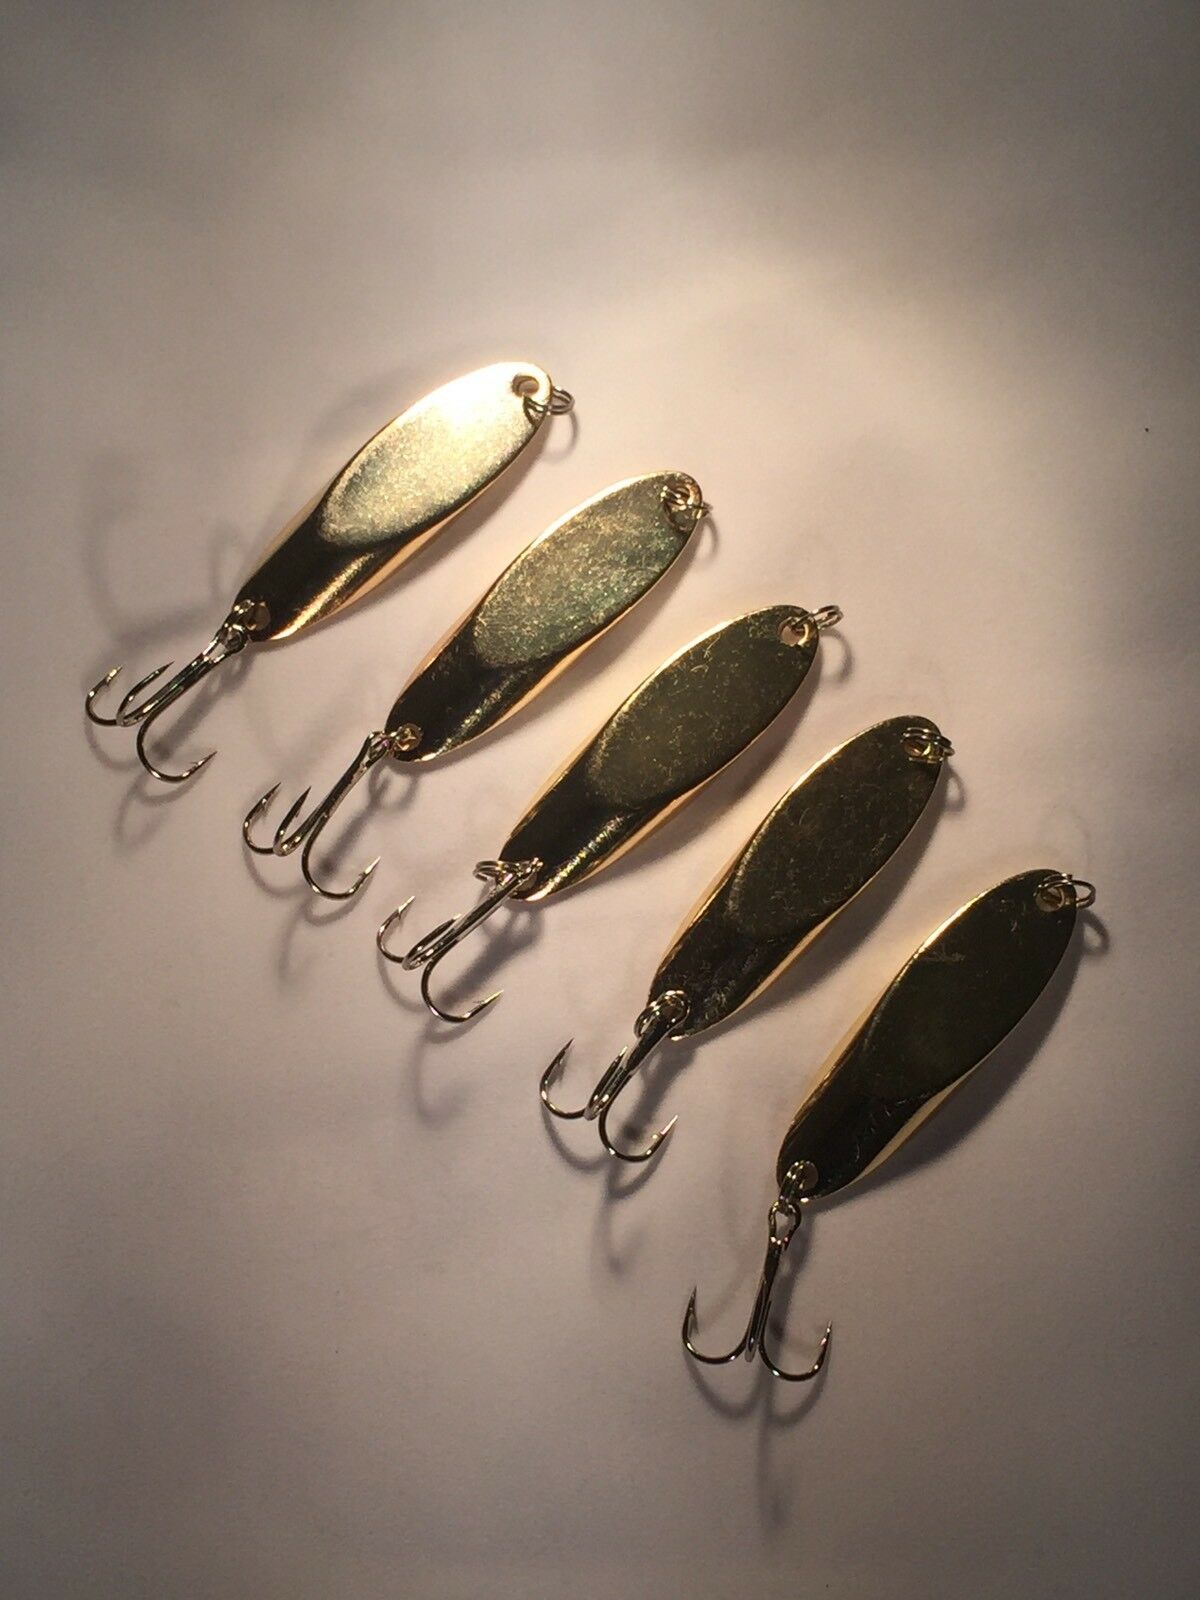 10 New, Kastmaster Style Gold Spoon, 3/4 ounce great for Trout